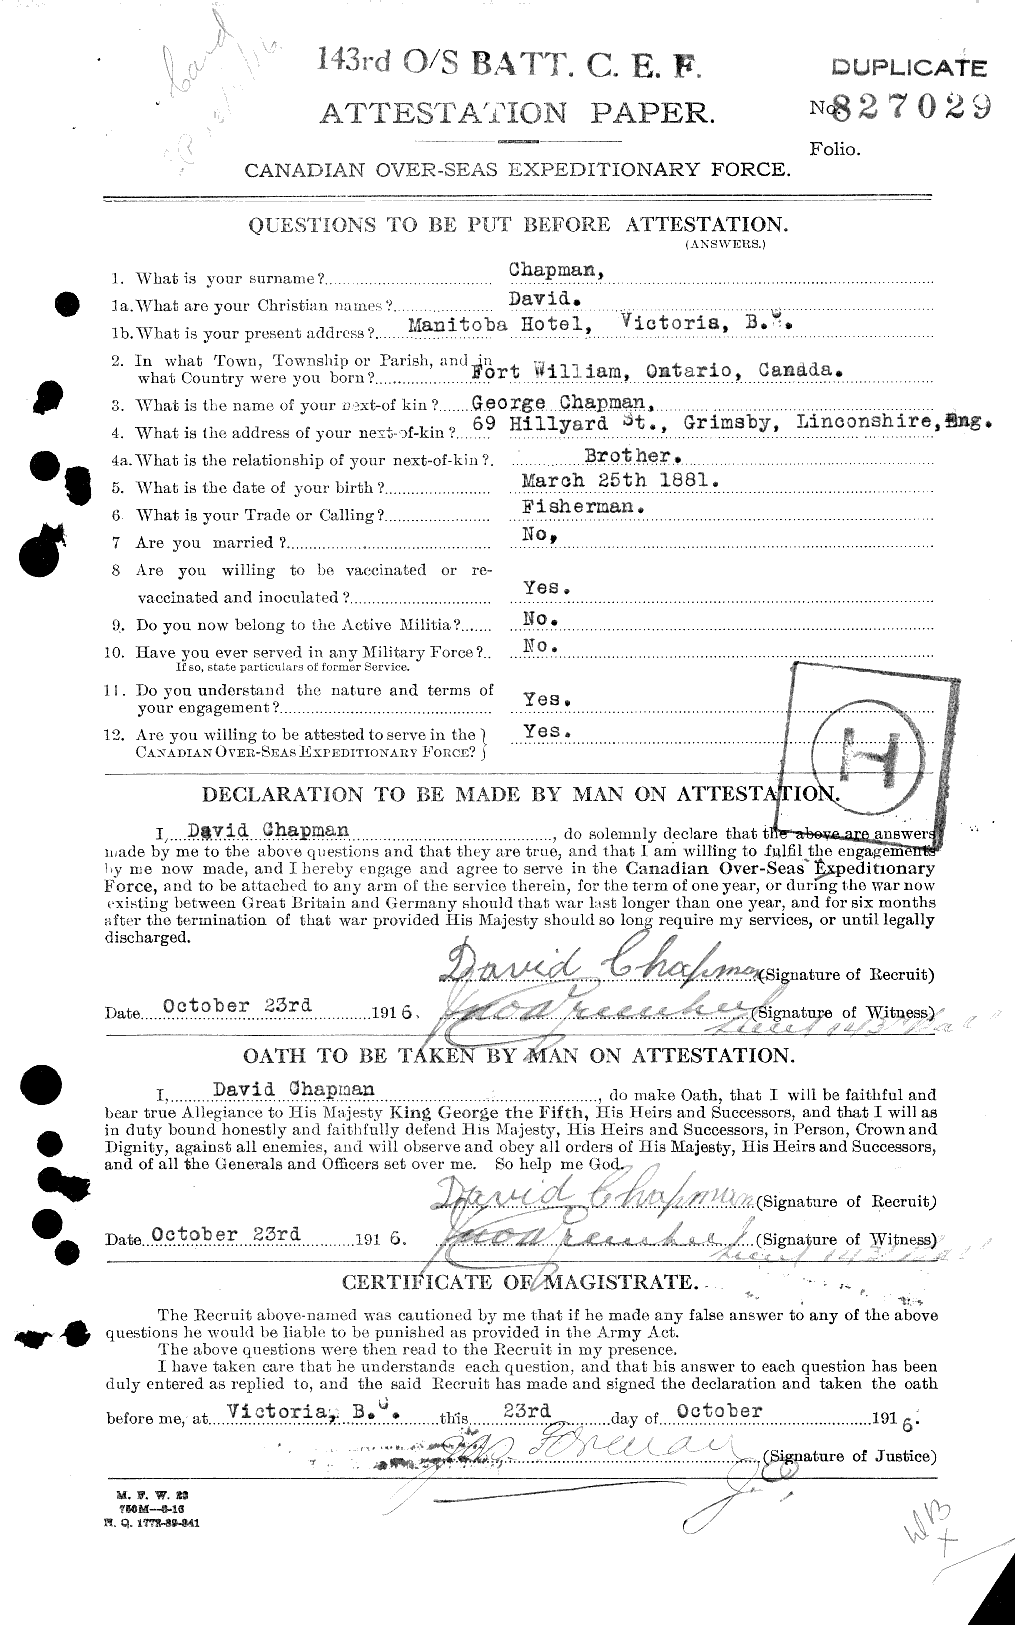 Personnel Records of the First World War - CEF 013923a